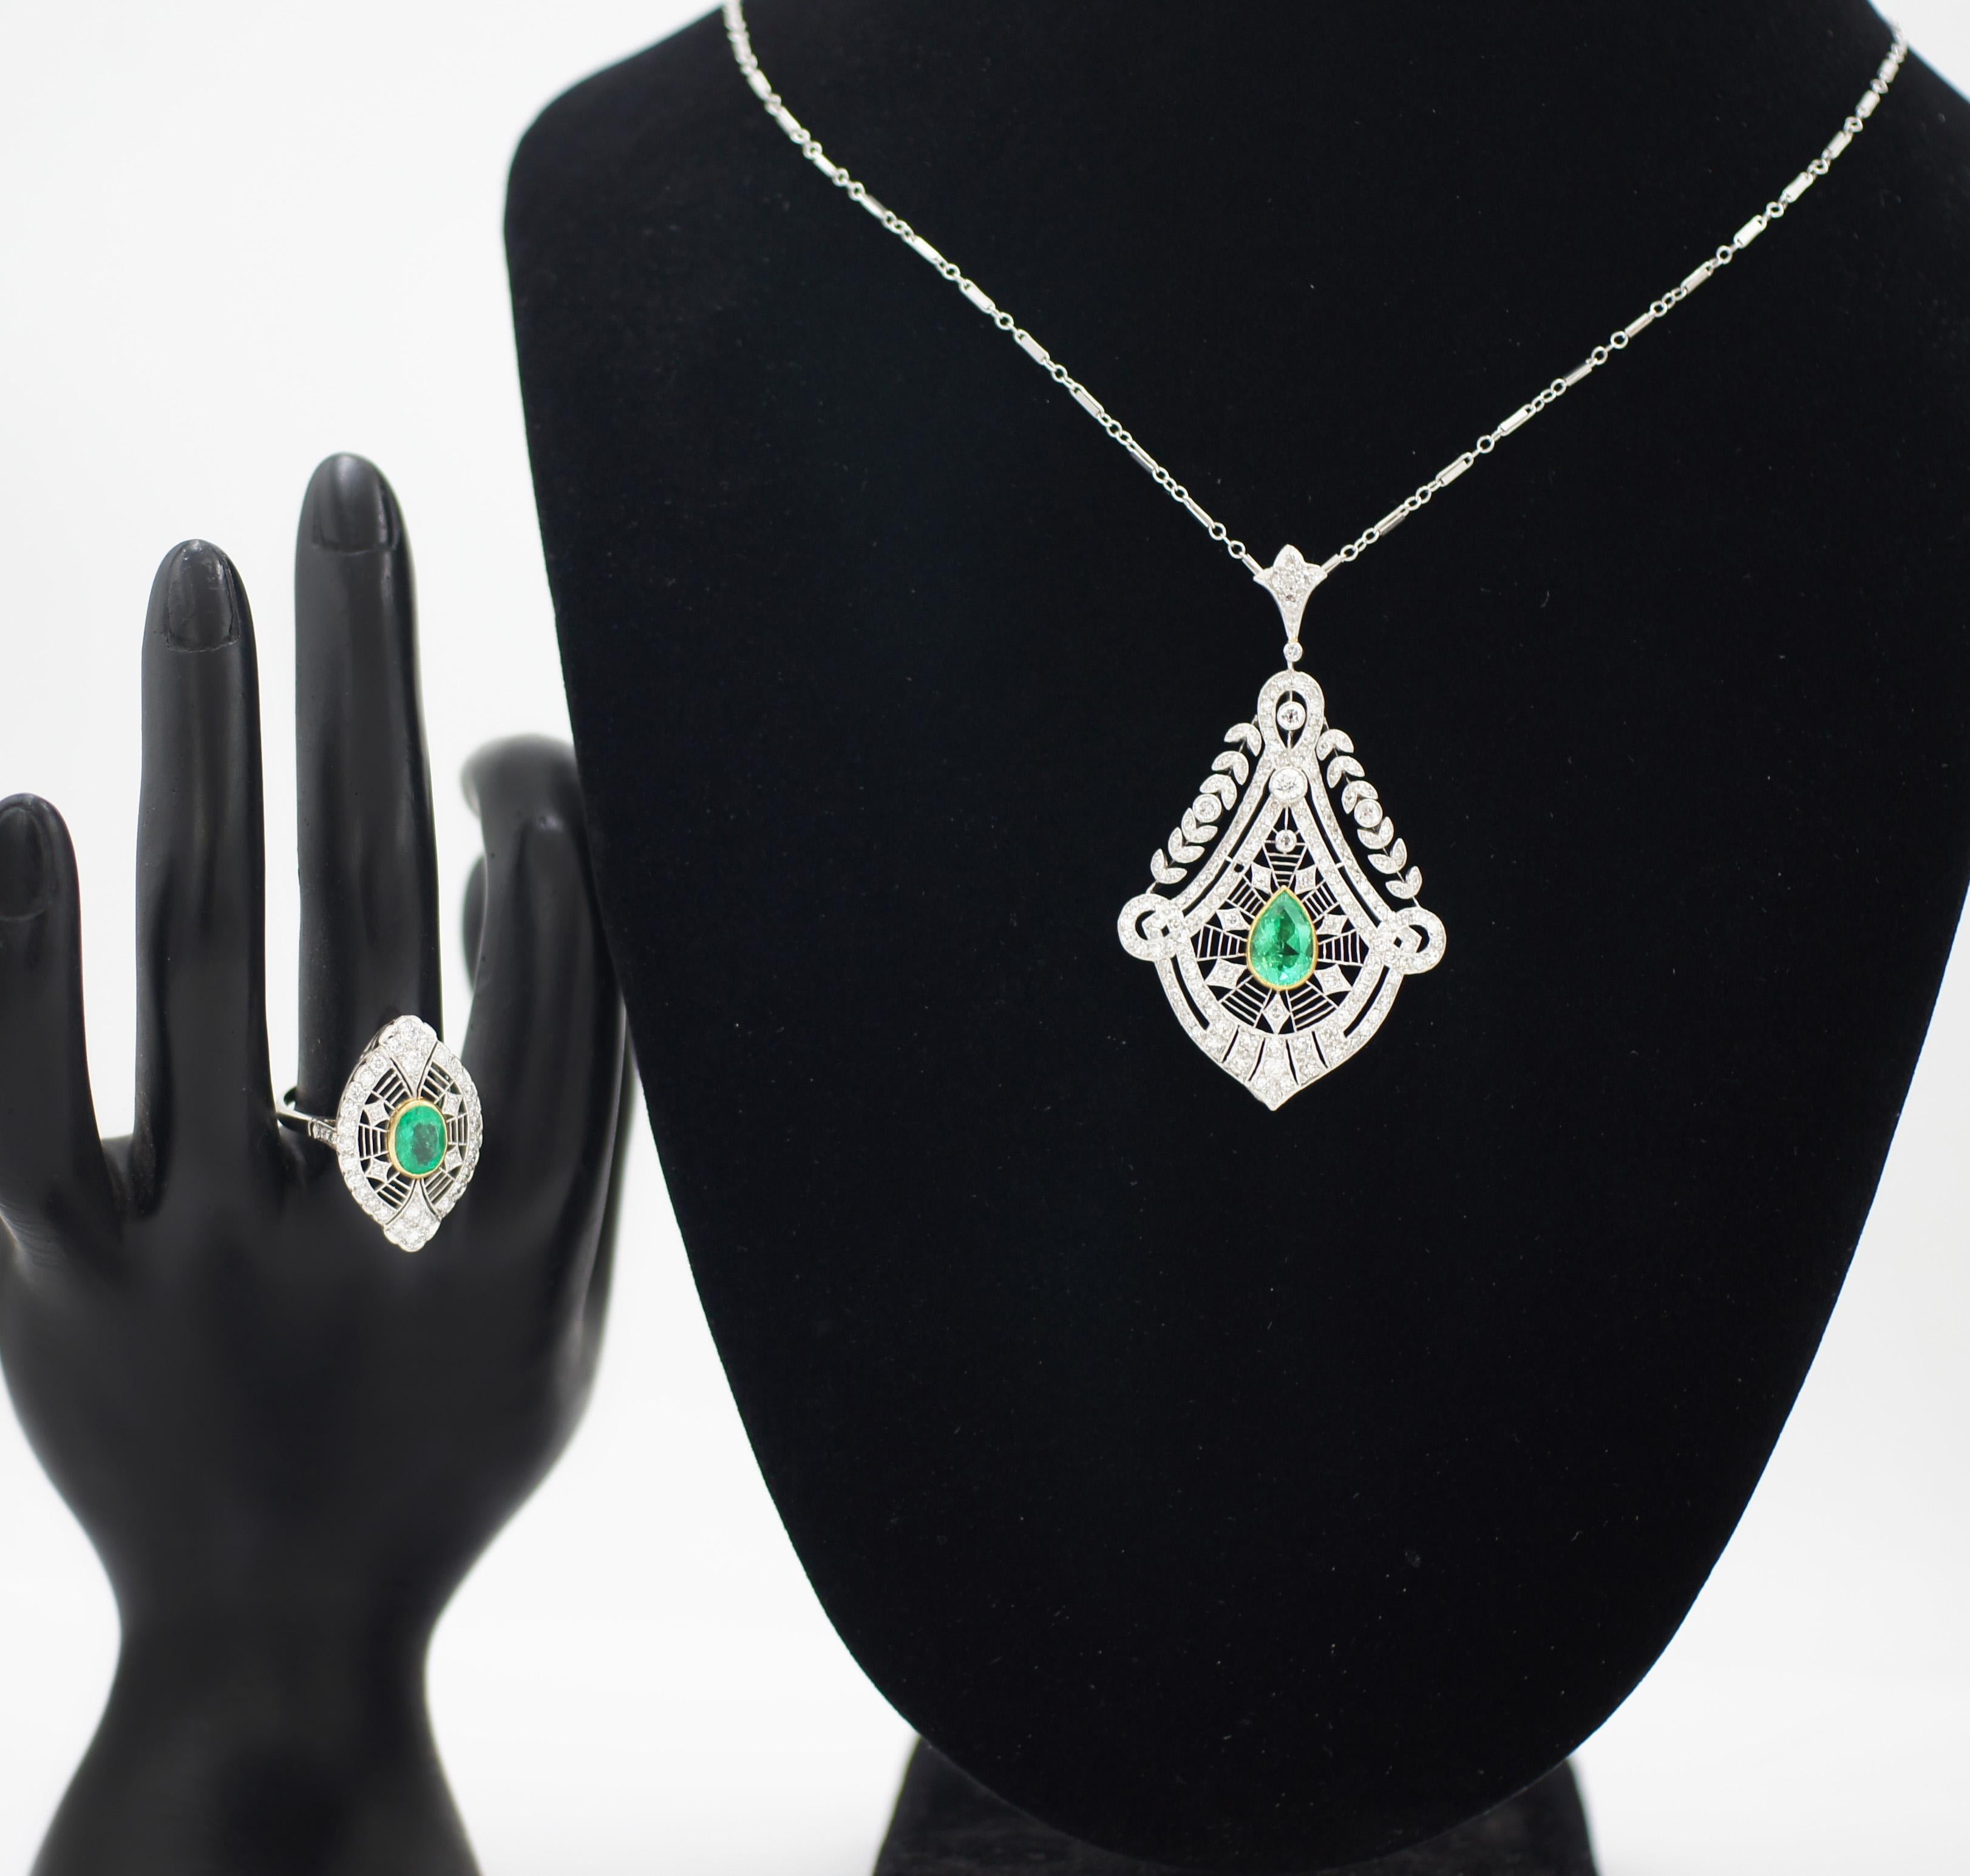 Vintage Art Deco Filigree Platinum Diamond and Emerald Necklace and Ring Set For Sale 3